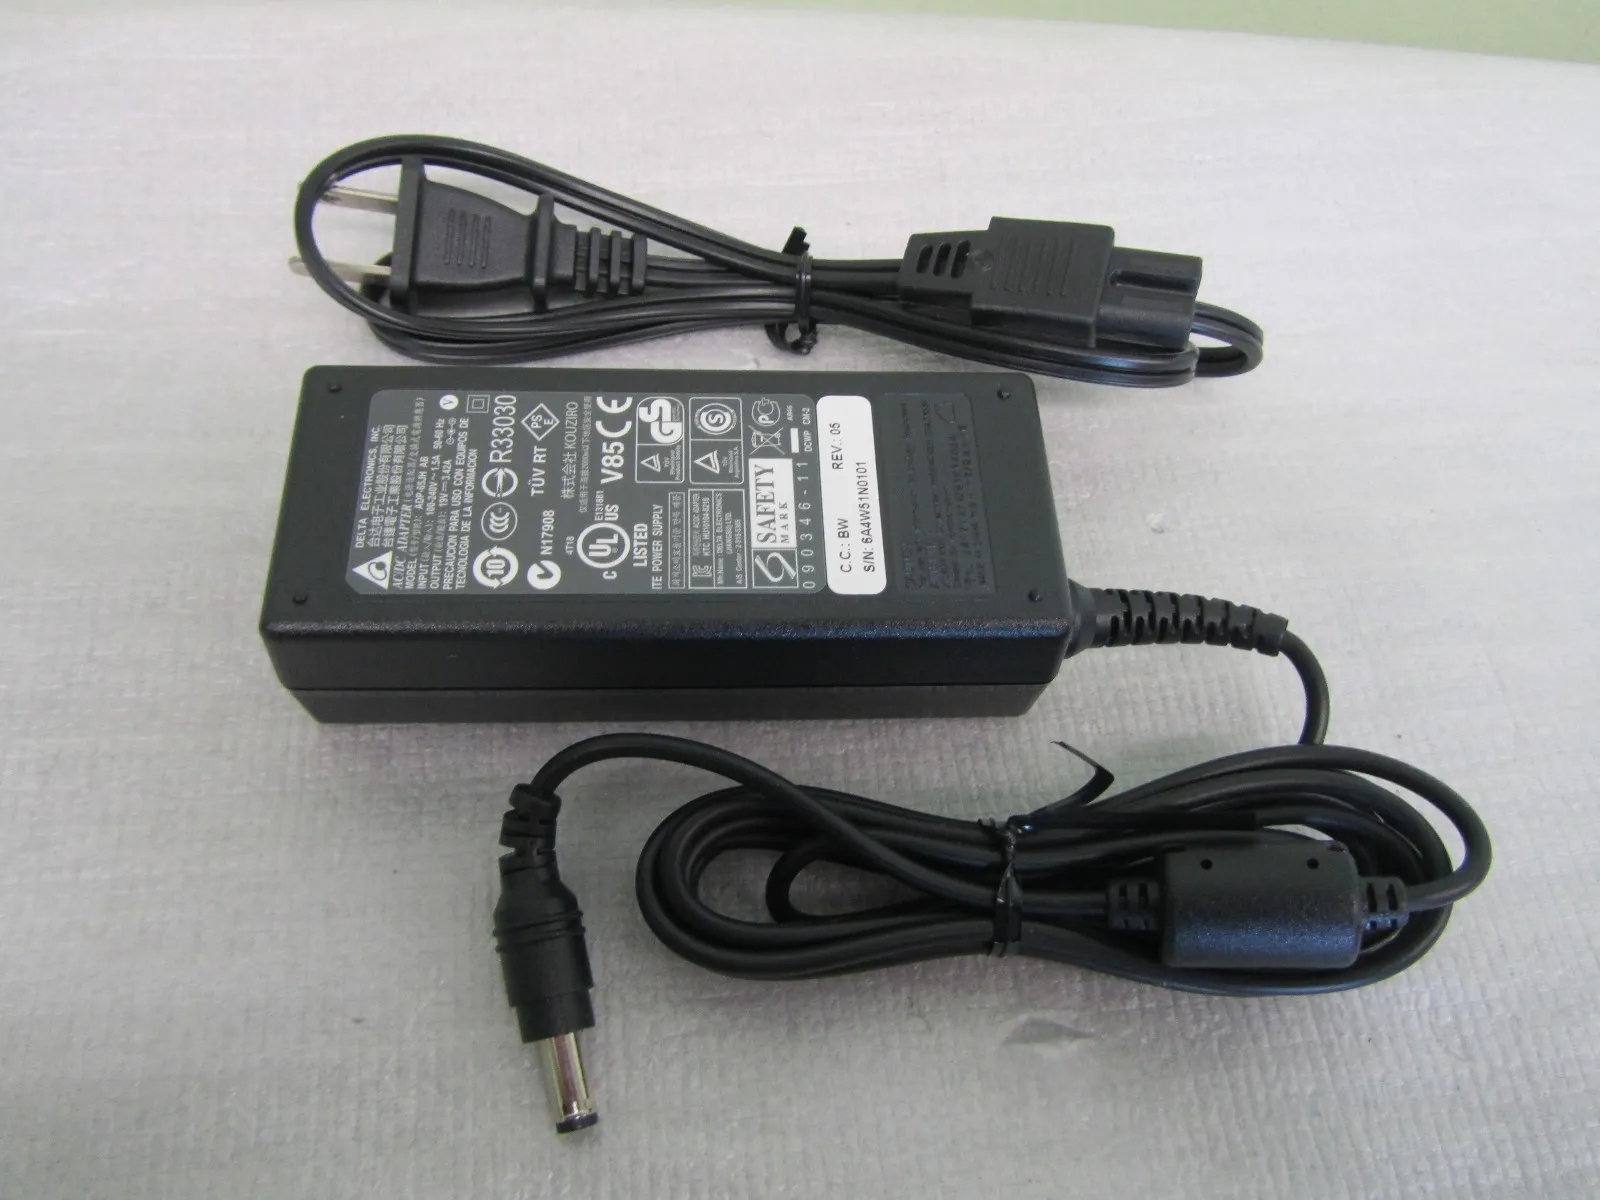 *Brand NEW*ORIGINAL DELTA ADP-65JH AB 19V 3.42A 65W AC ADAPTER Power Supply